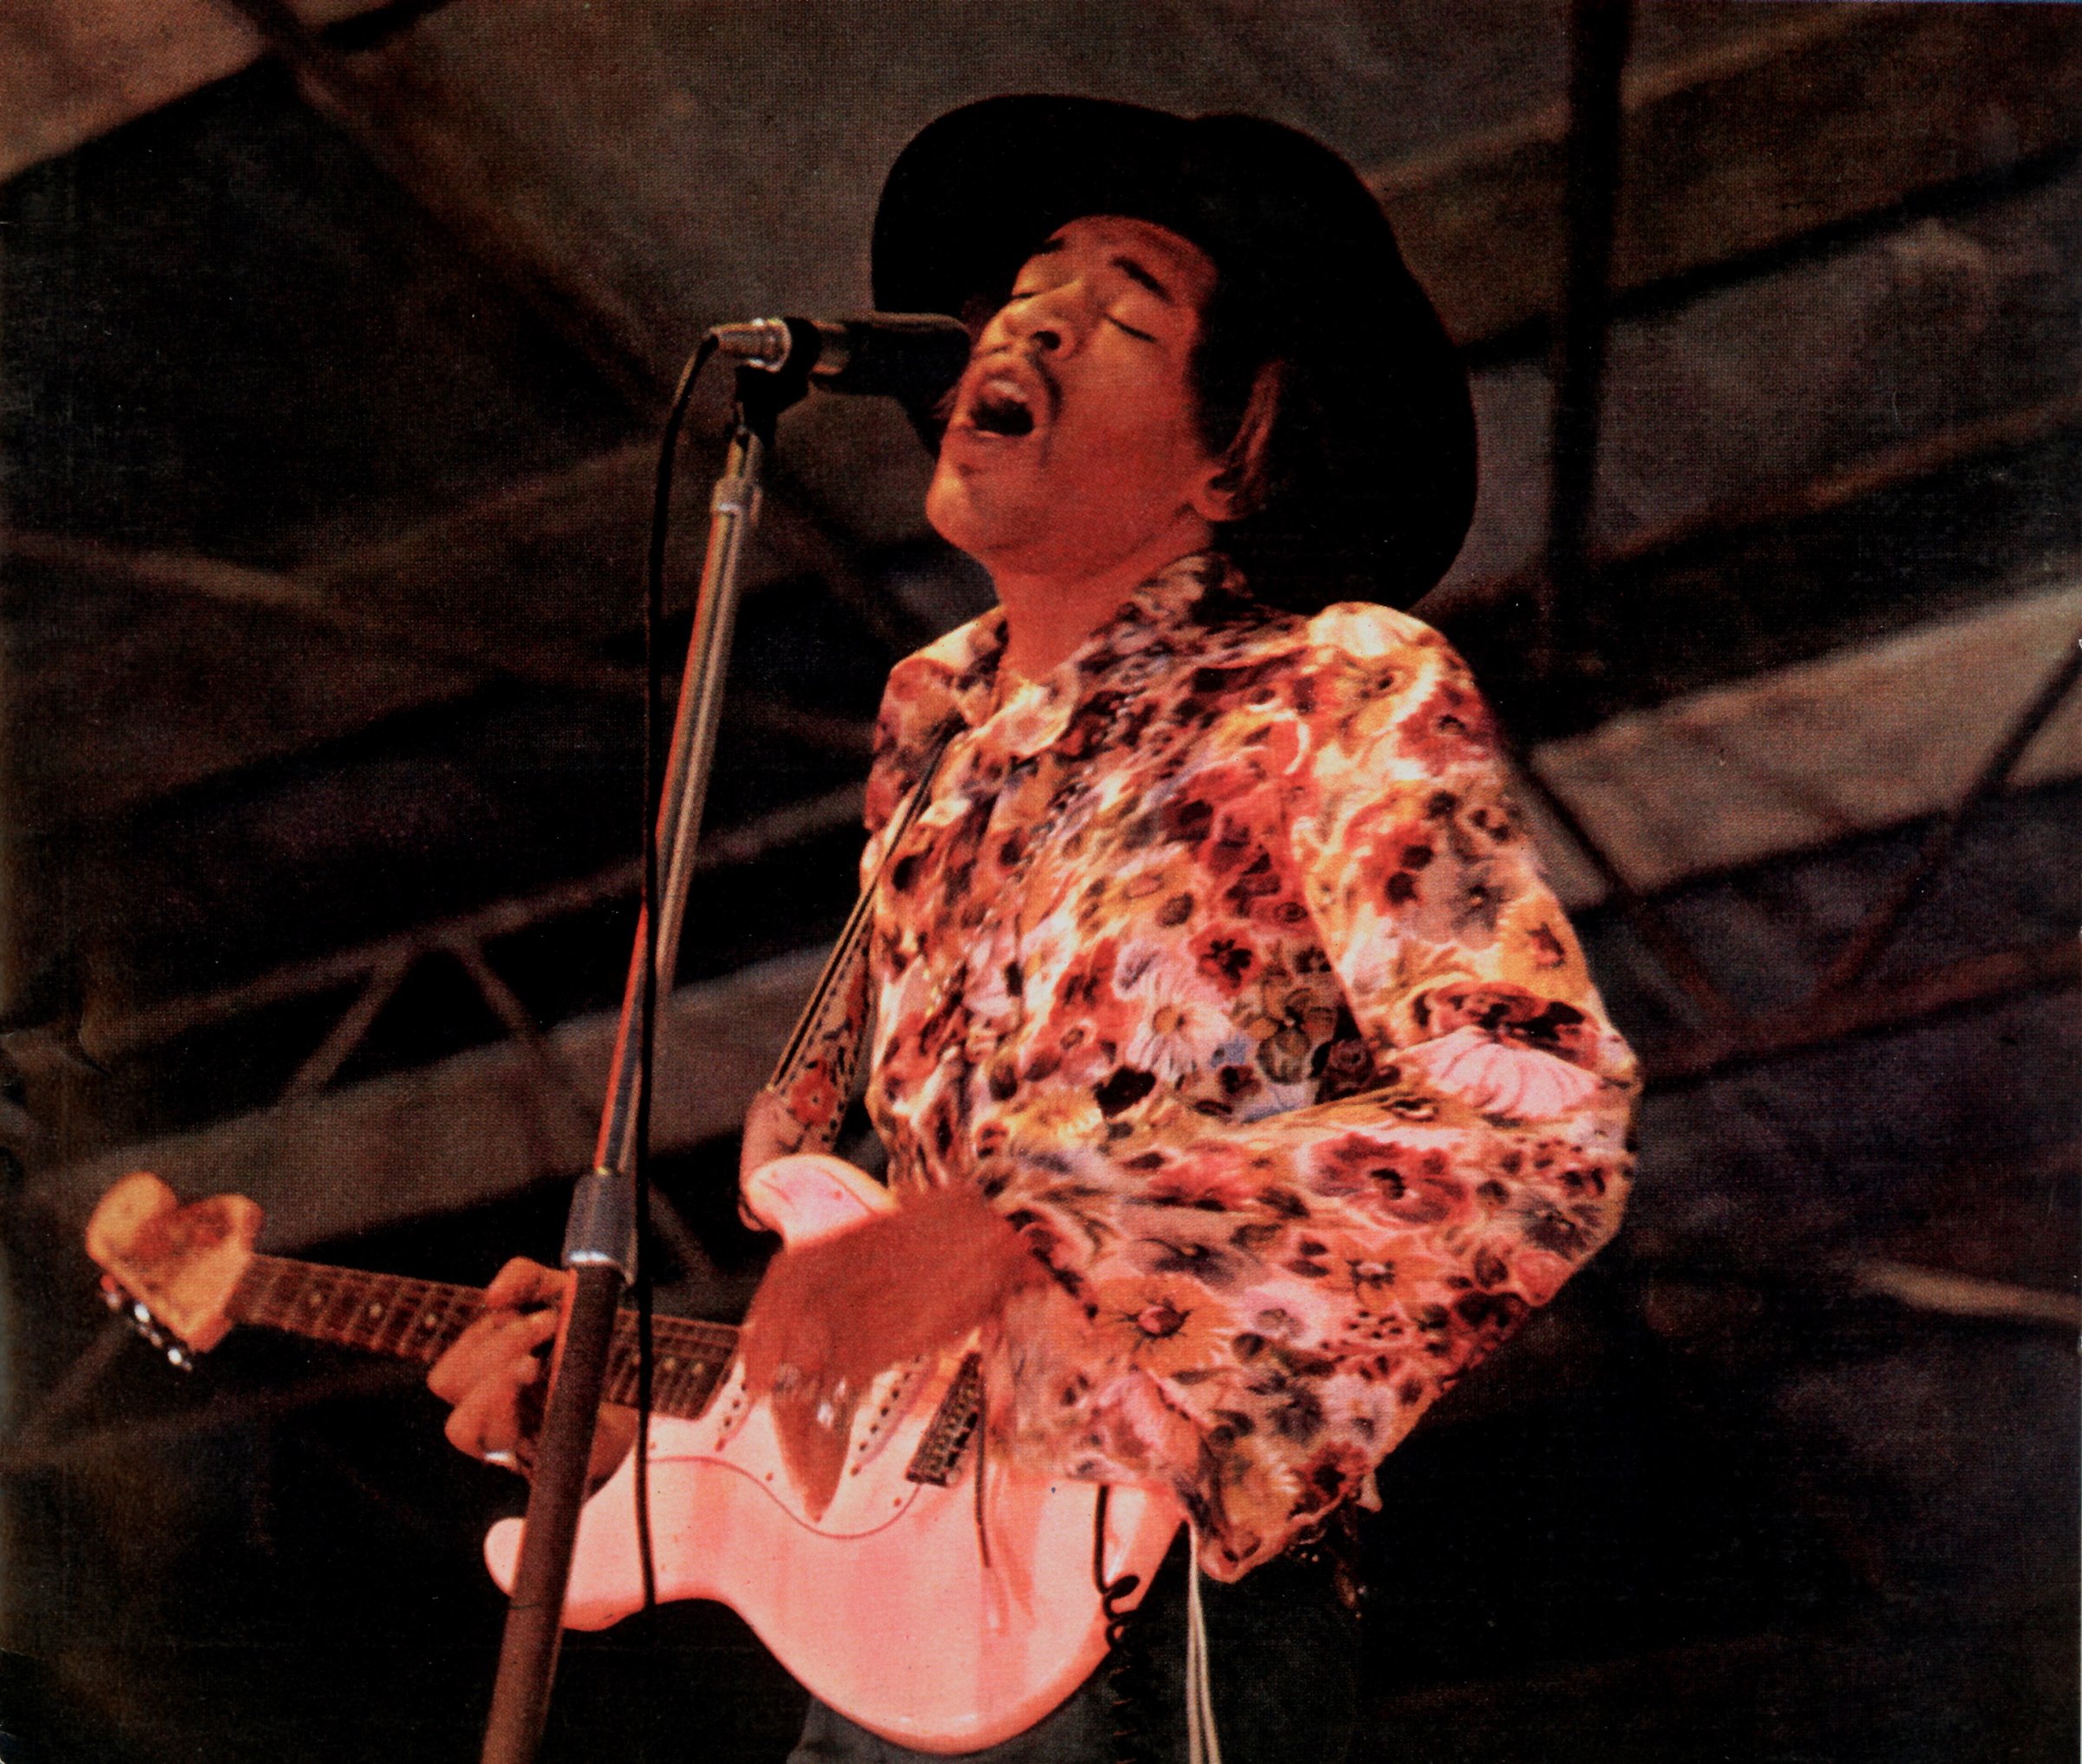 Jimi Hendrix, whose signature style came from one of his girlfriends, playing guitar on stage